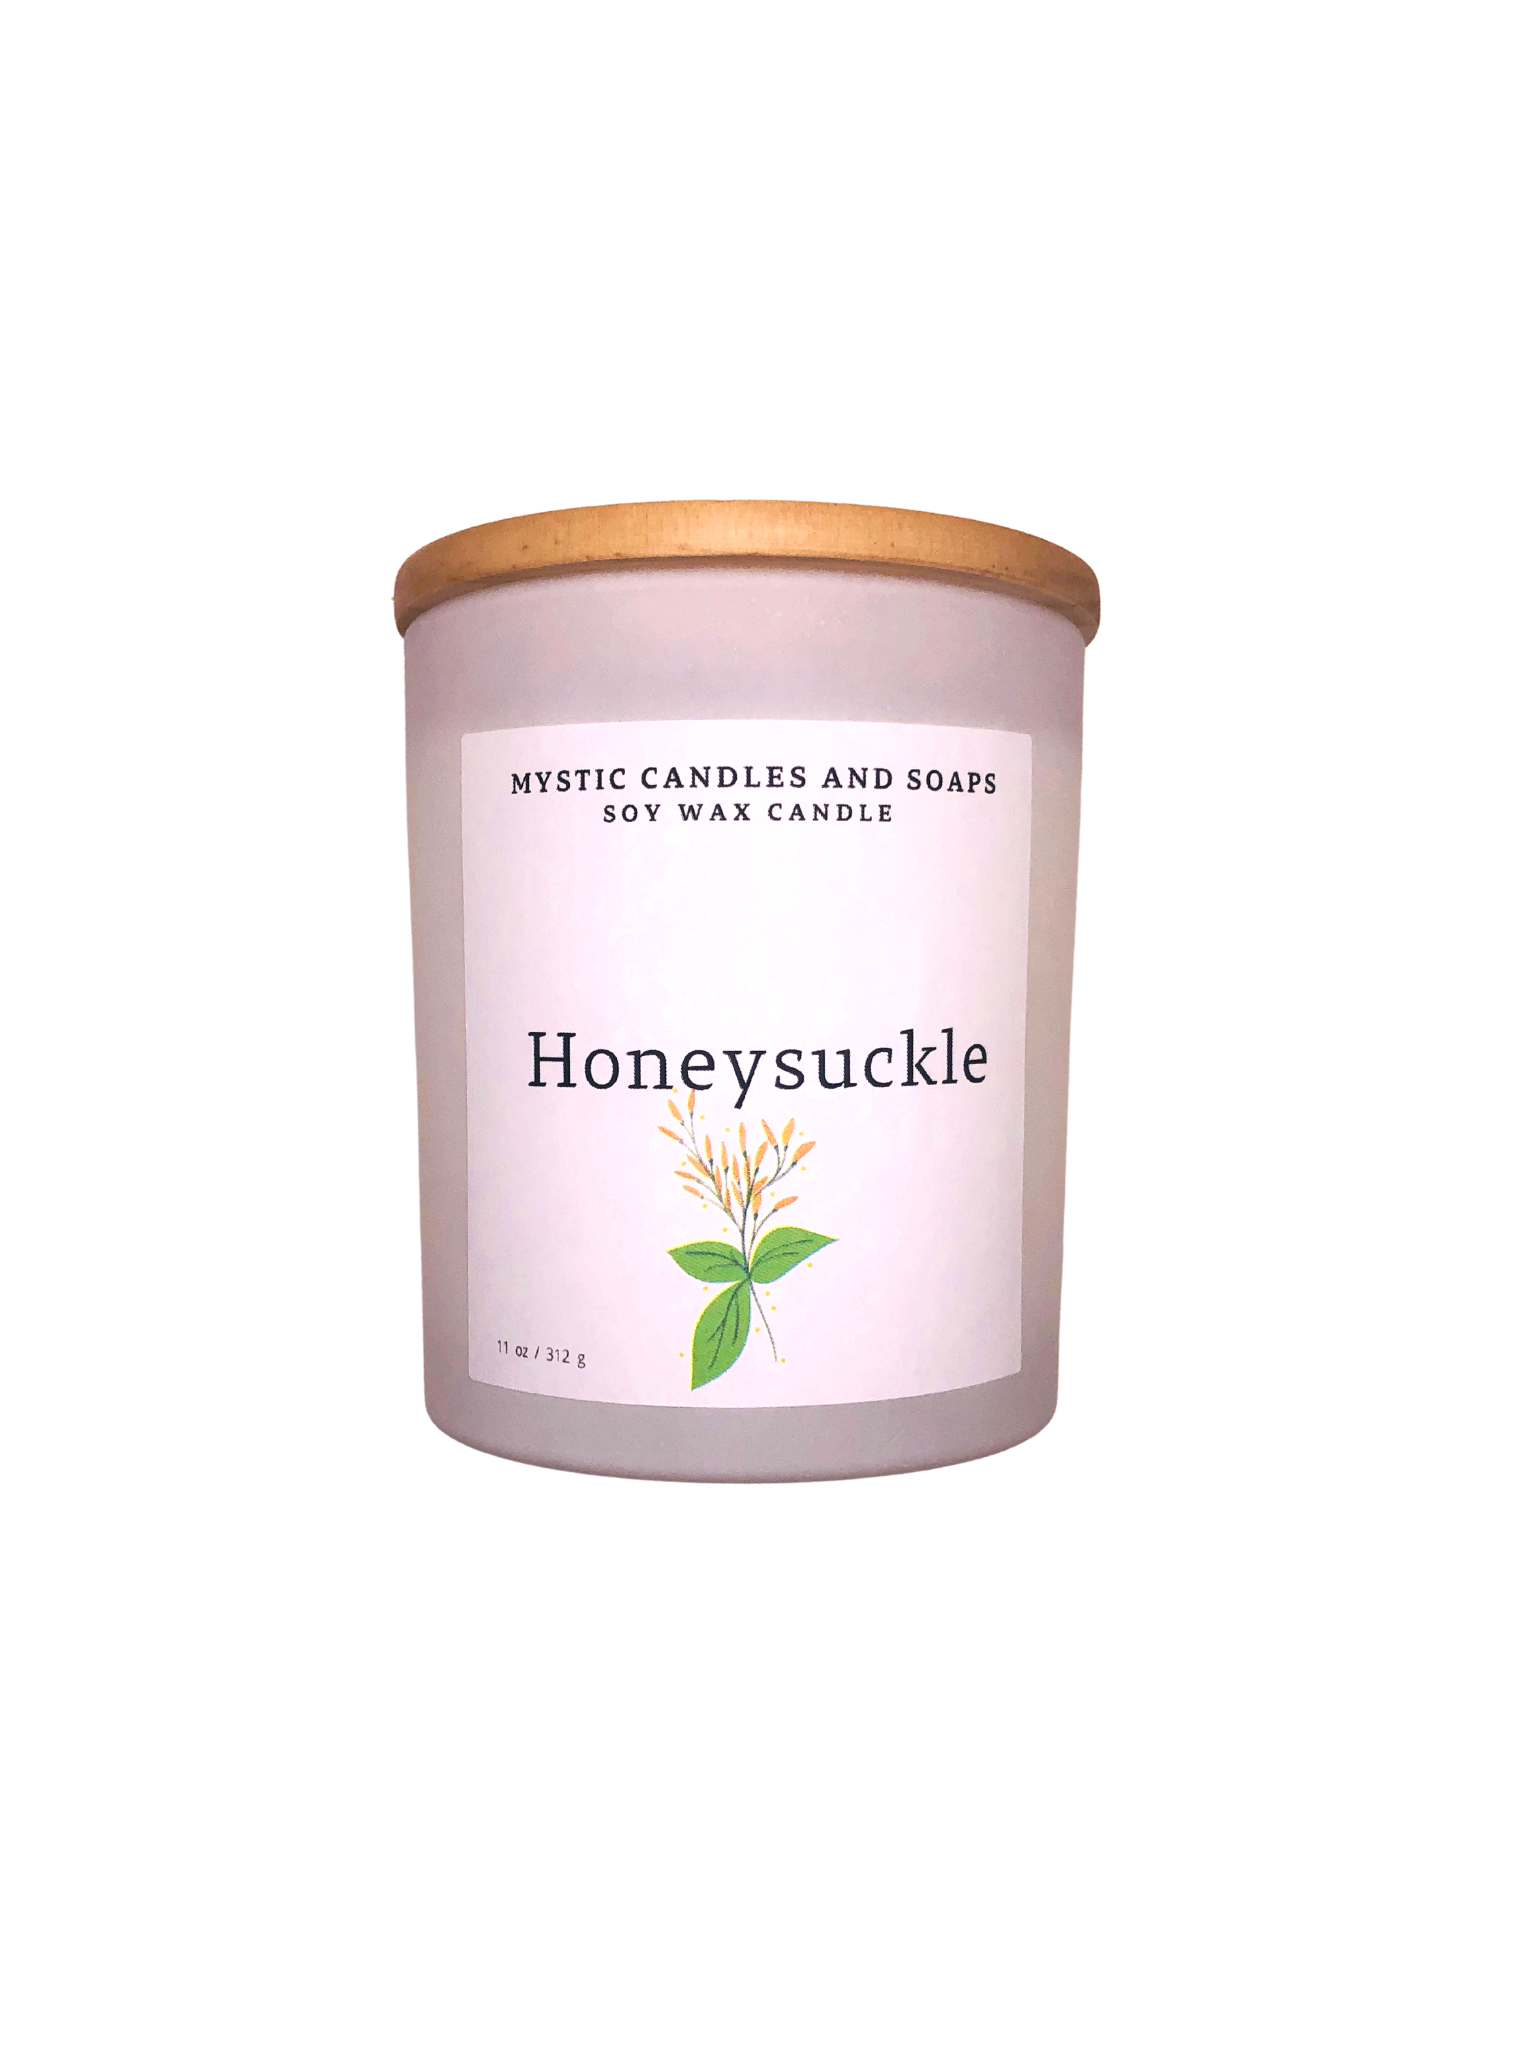 Honeysuckle Candle - Mystic Candles and Soaps LLC